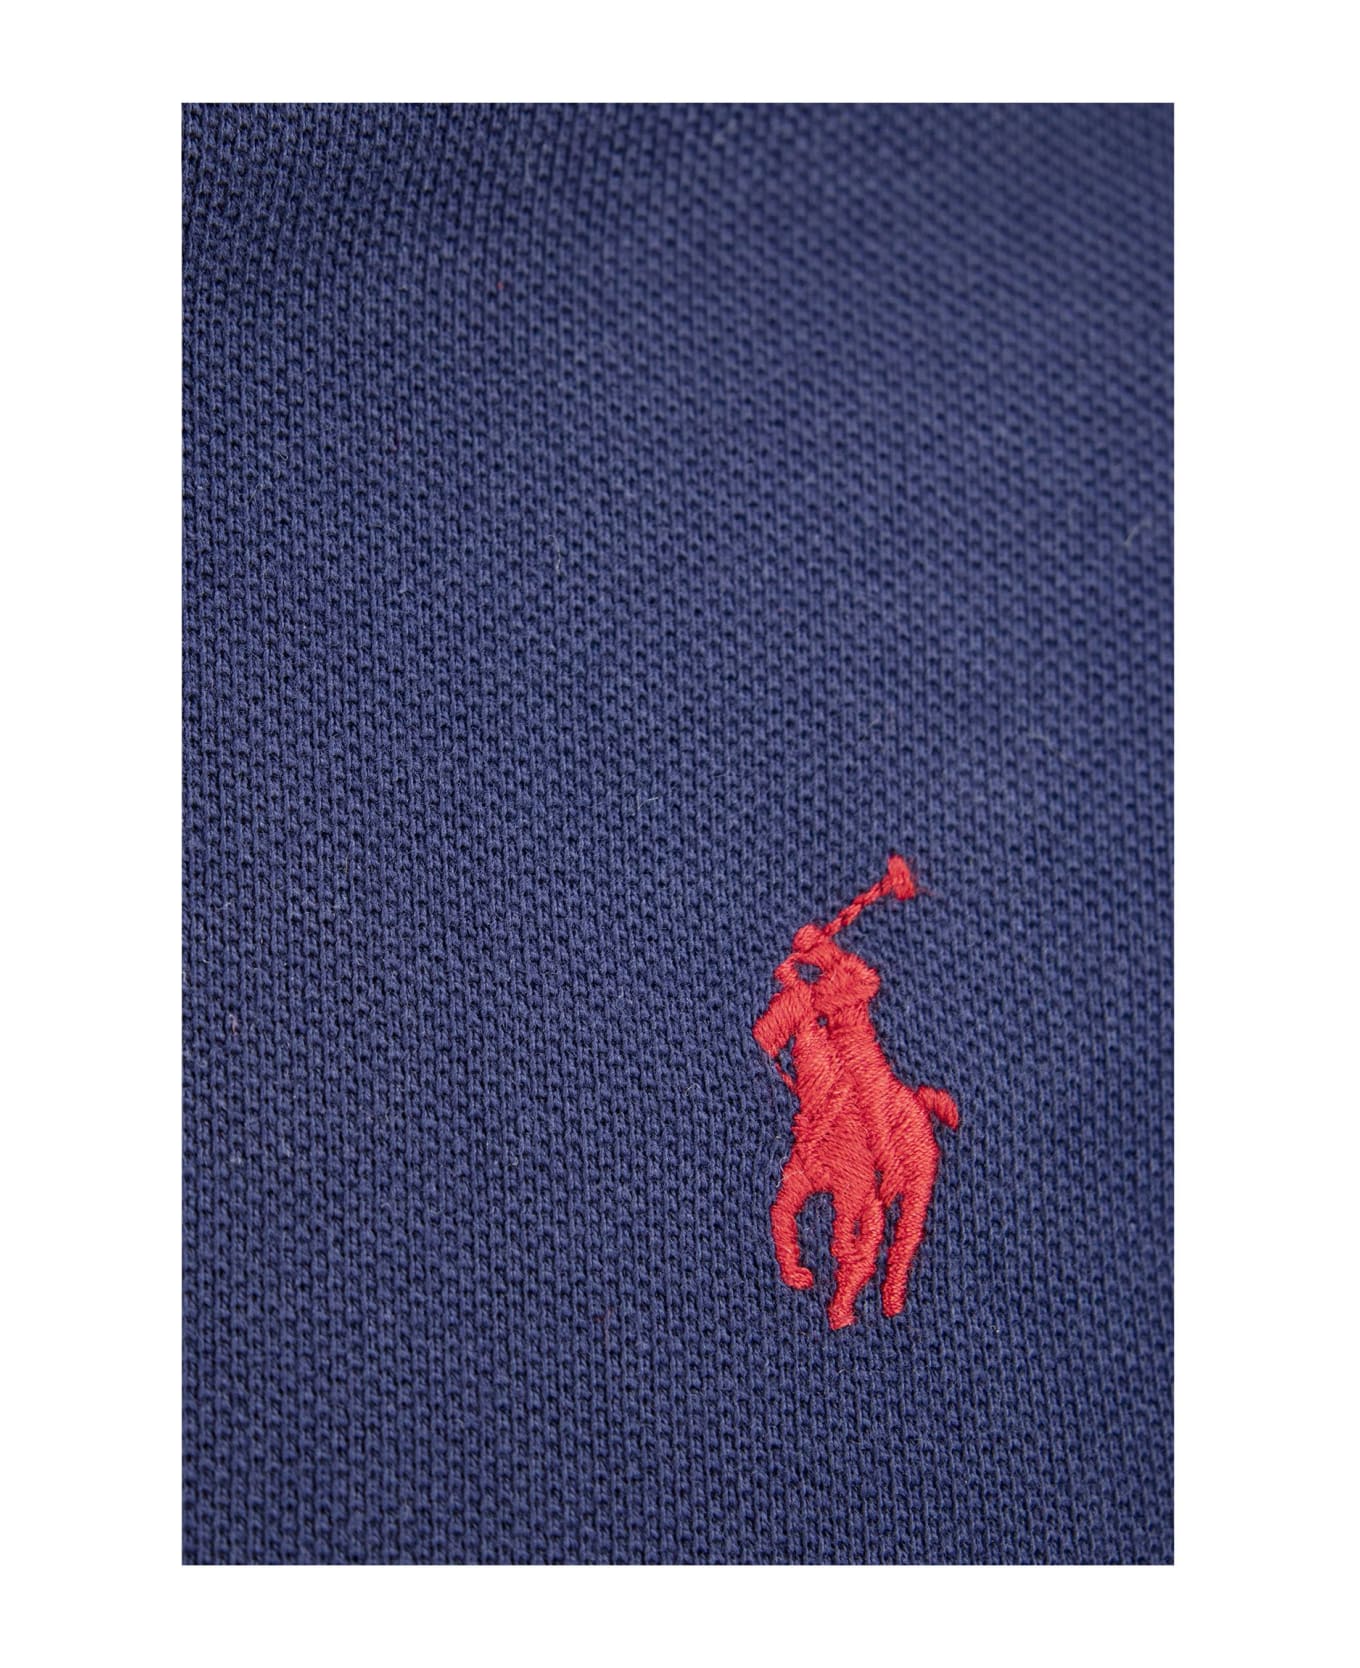 Ralph Lauren Navy Blue And Red Slim-fit Pique Polo Shirt - Blue ポロシャツ